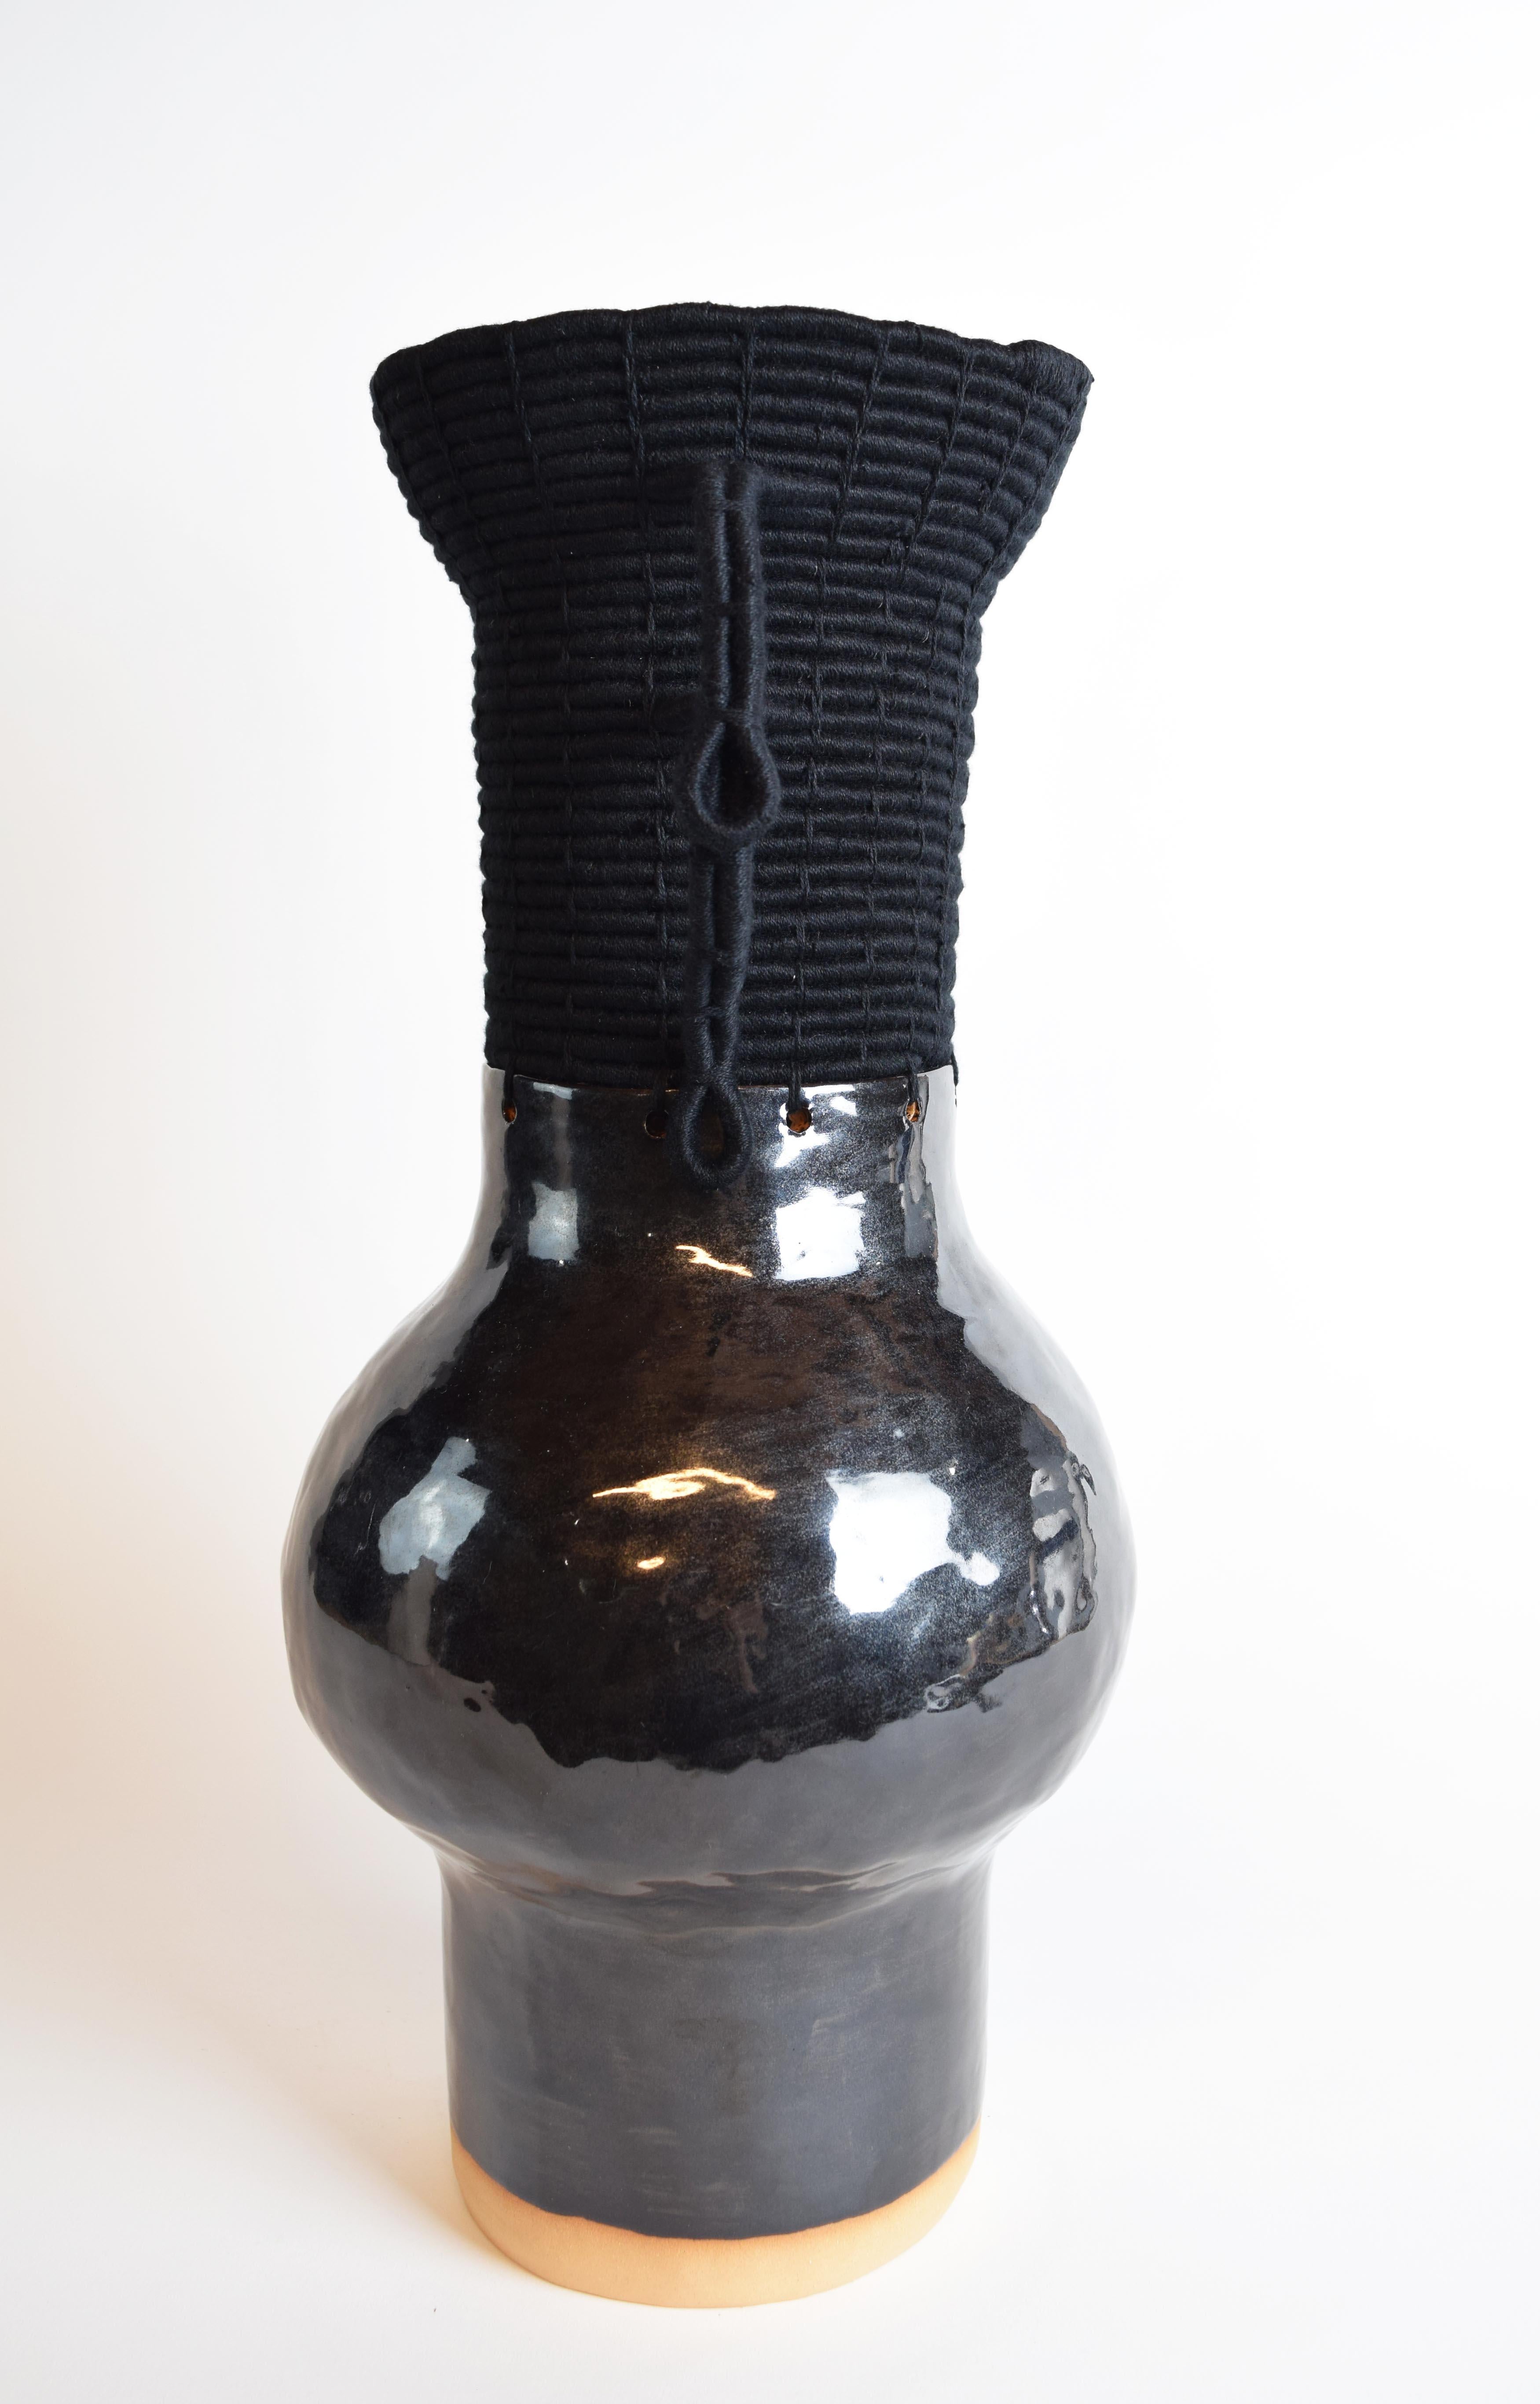 American One of a Kind Vessel #752, Hand Formed Black Ceramic and Woven Black Cotton